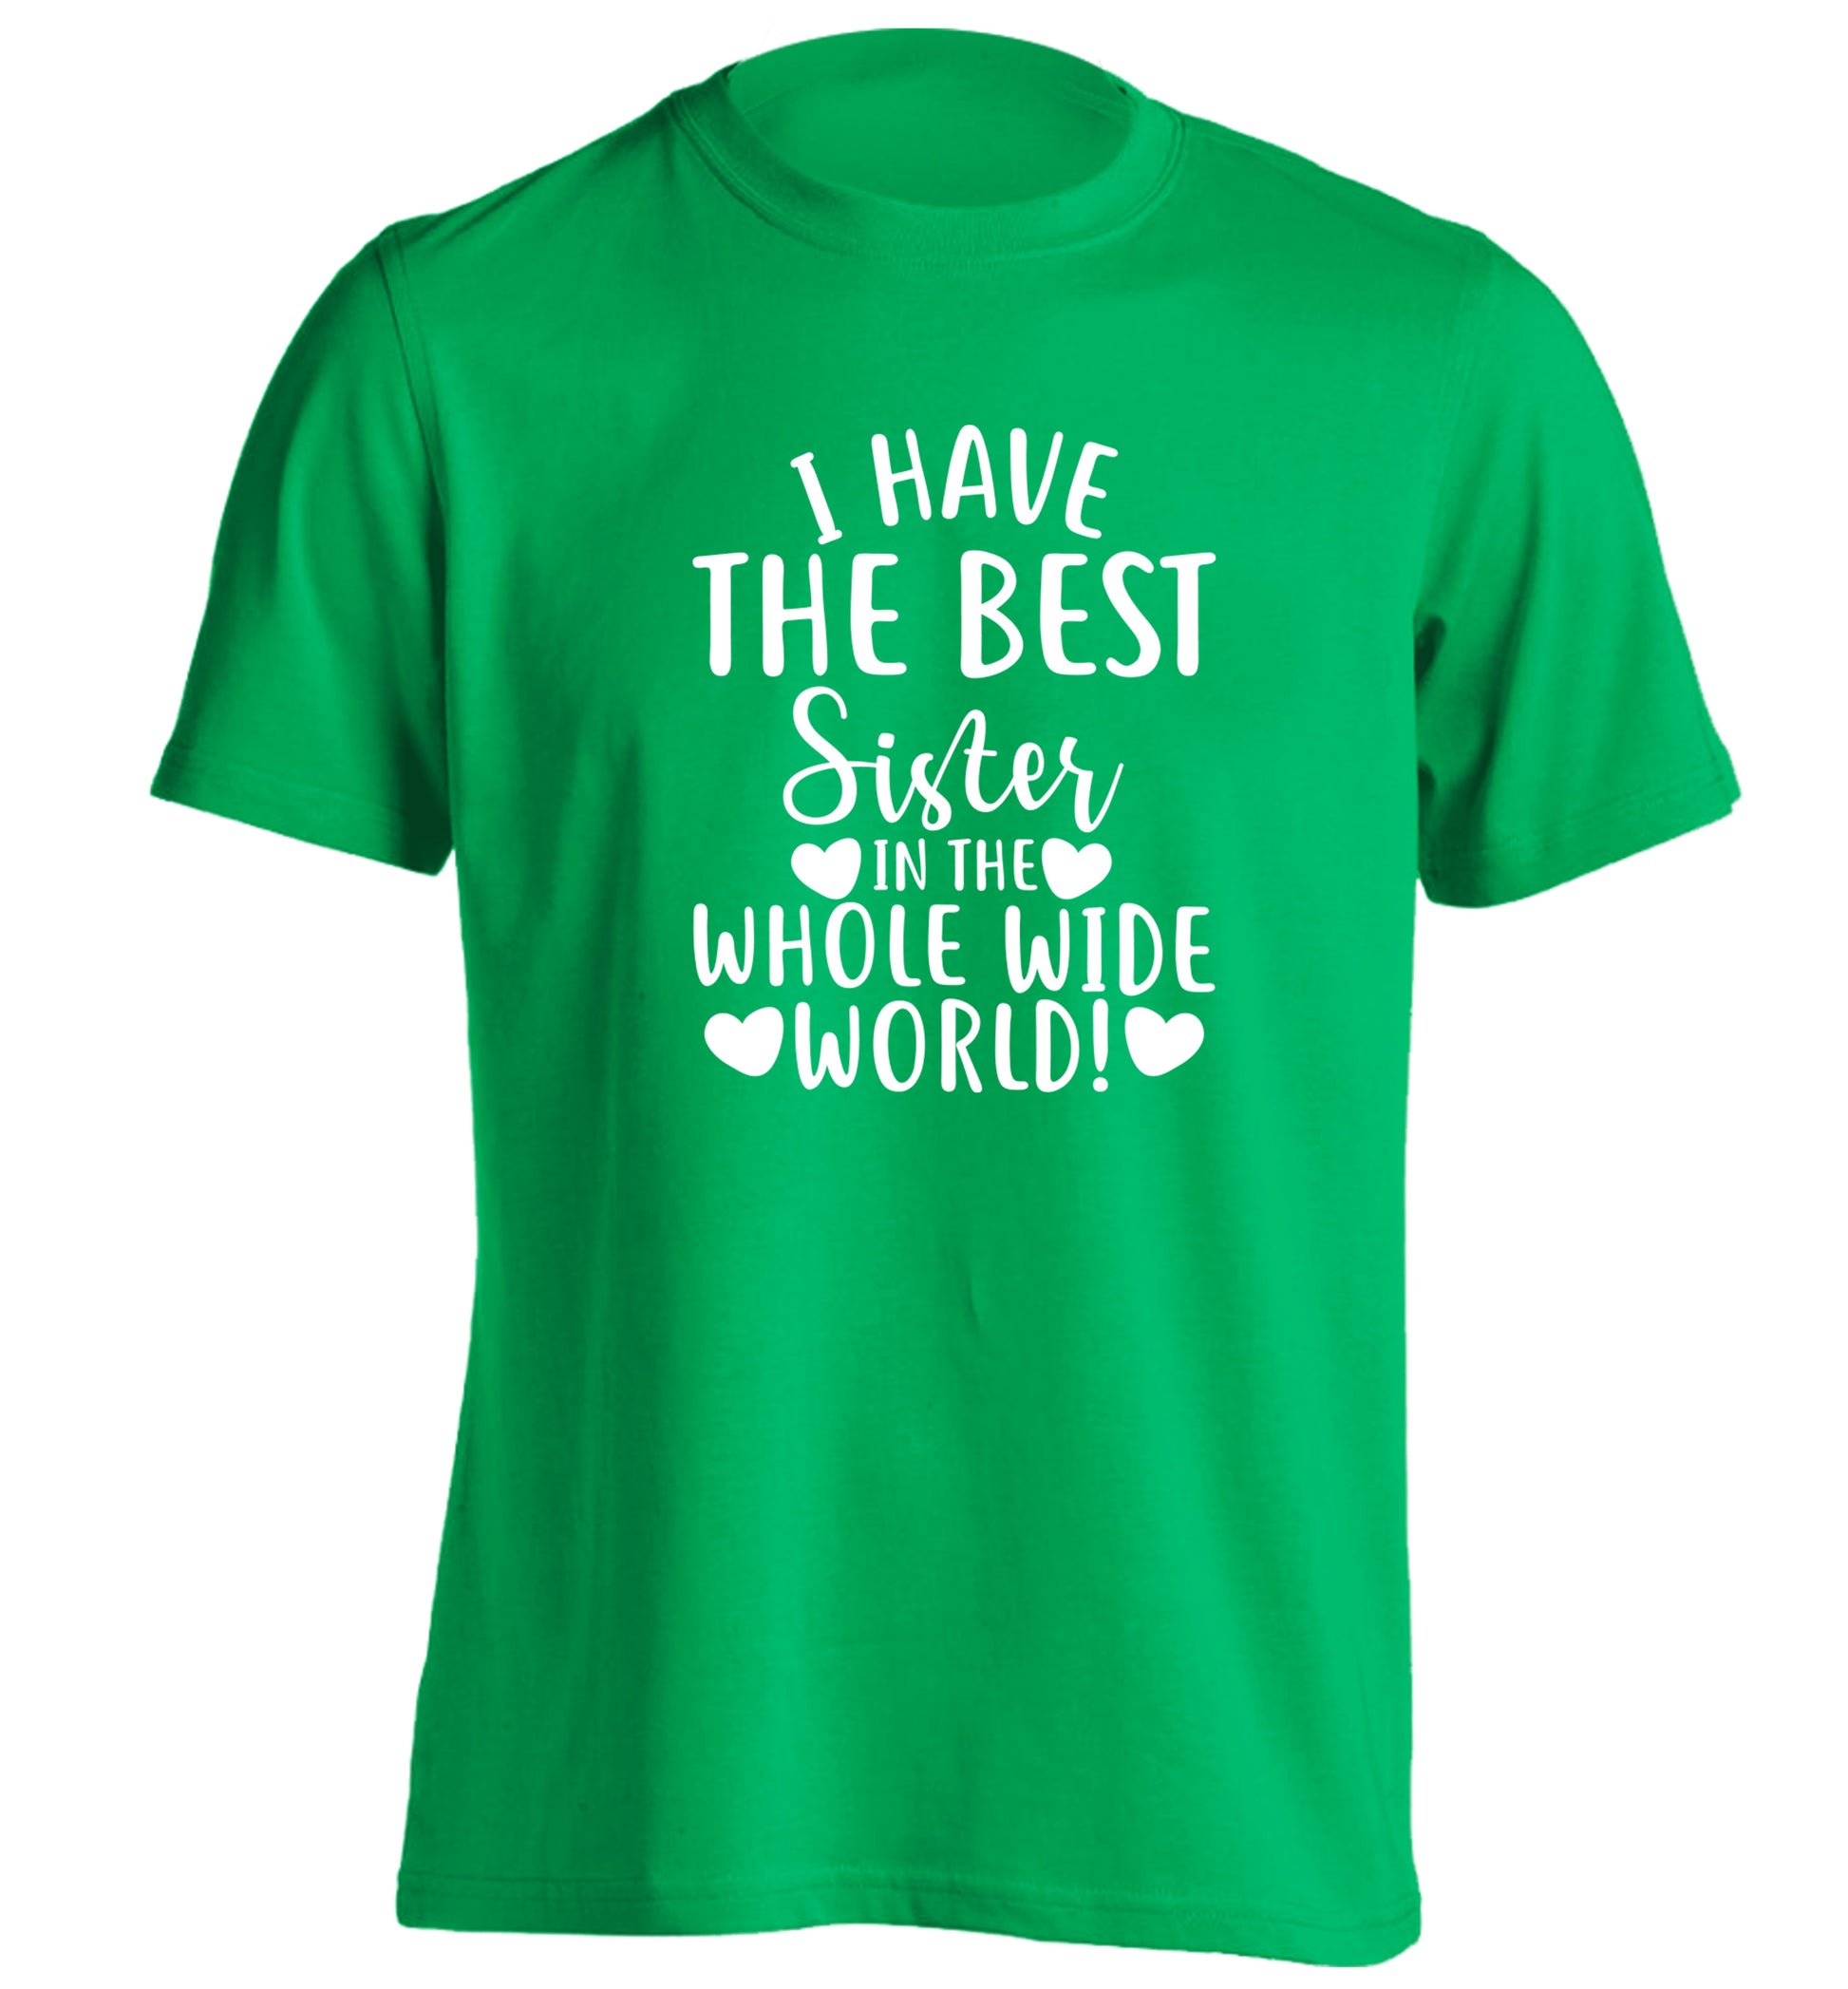 I have the best sister in the whole wide world! adults unisex green Tshirt 2XL